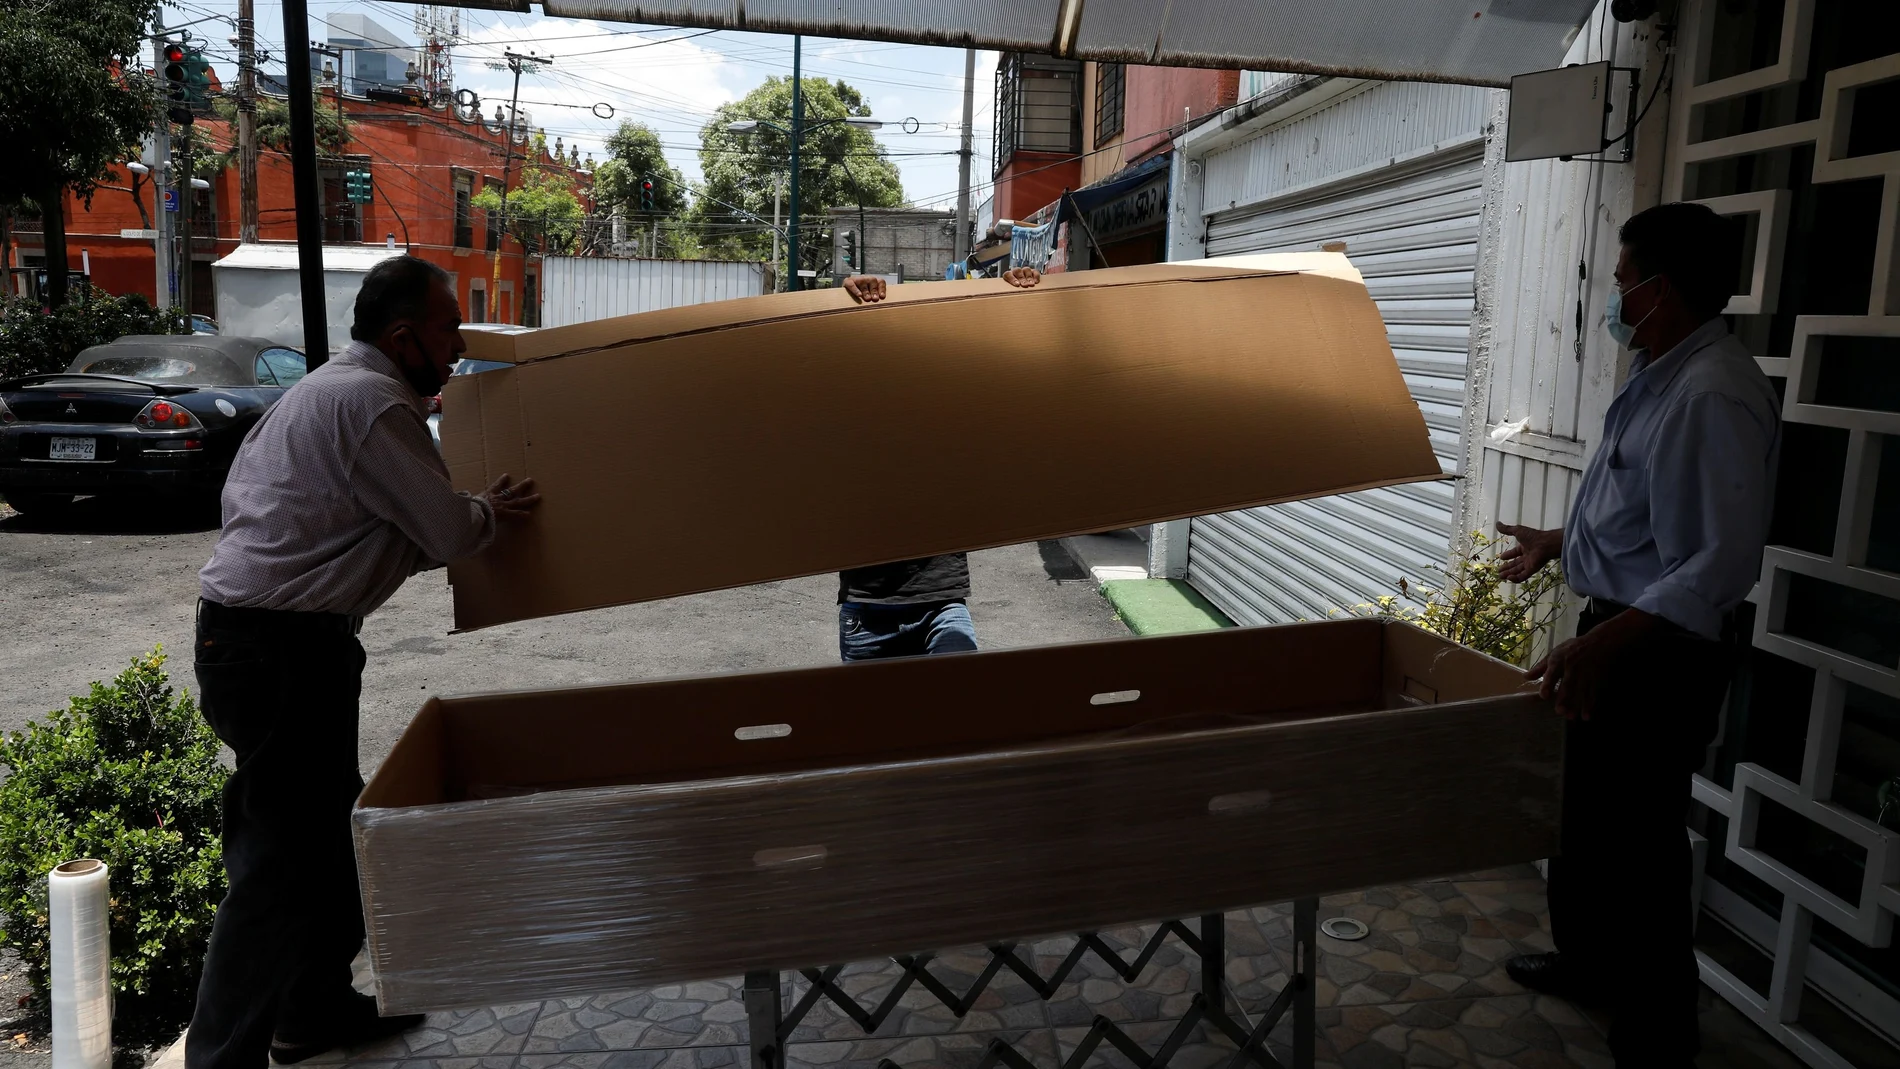 Funeral workers put together a cardboard coffin before collecting the body of a person who died of the coronavirus disease (COVID-19) in Mexico City